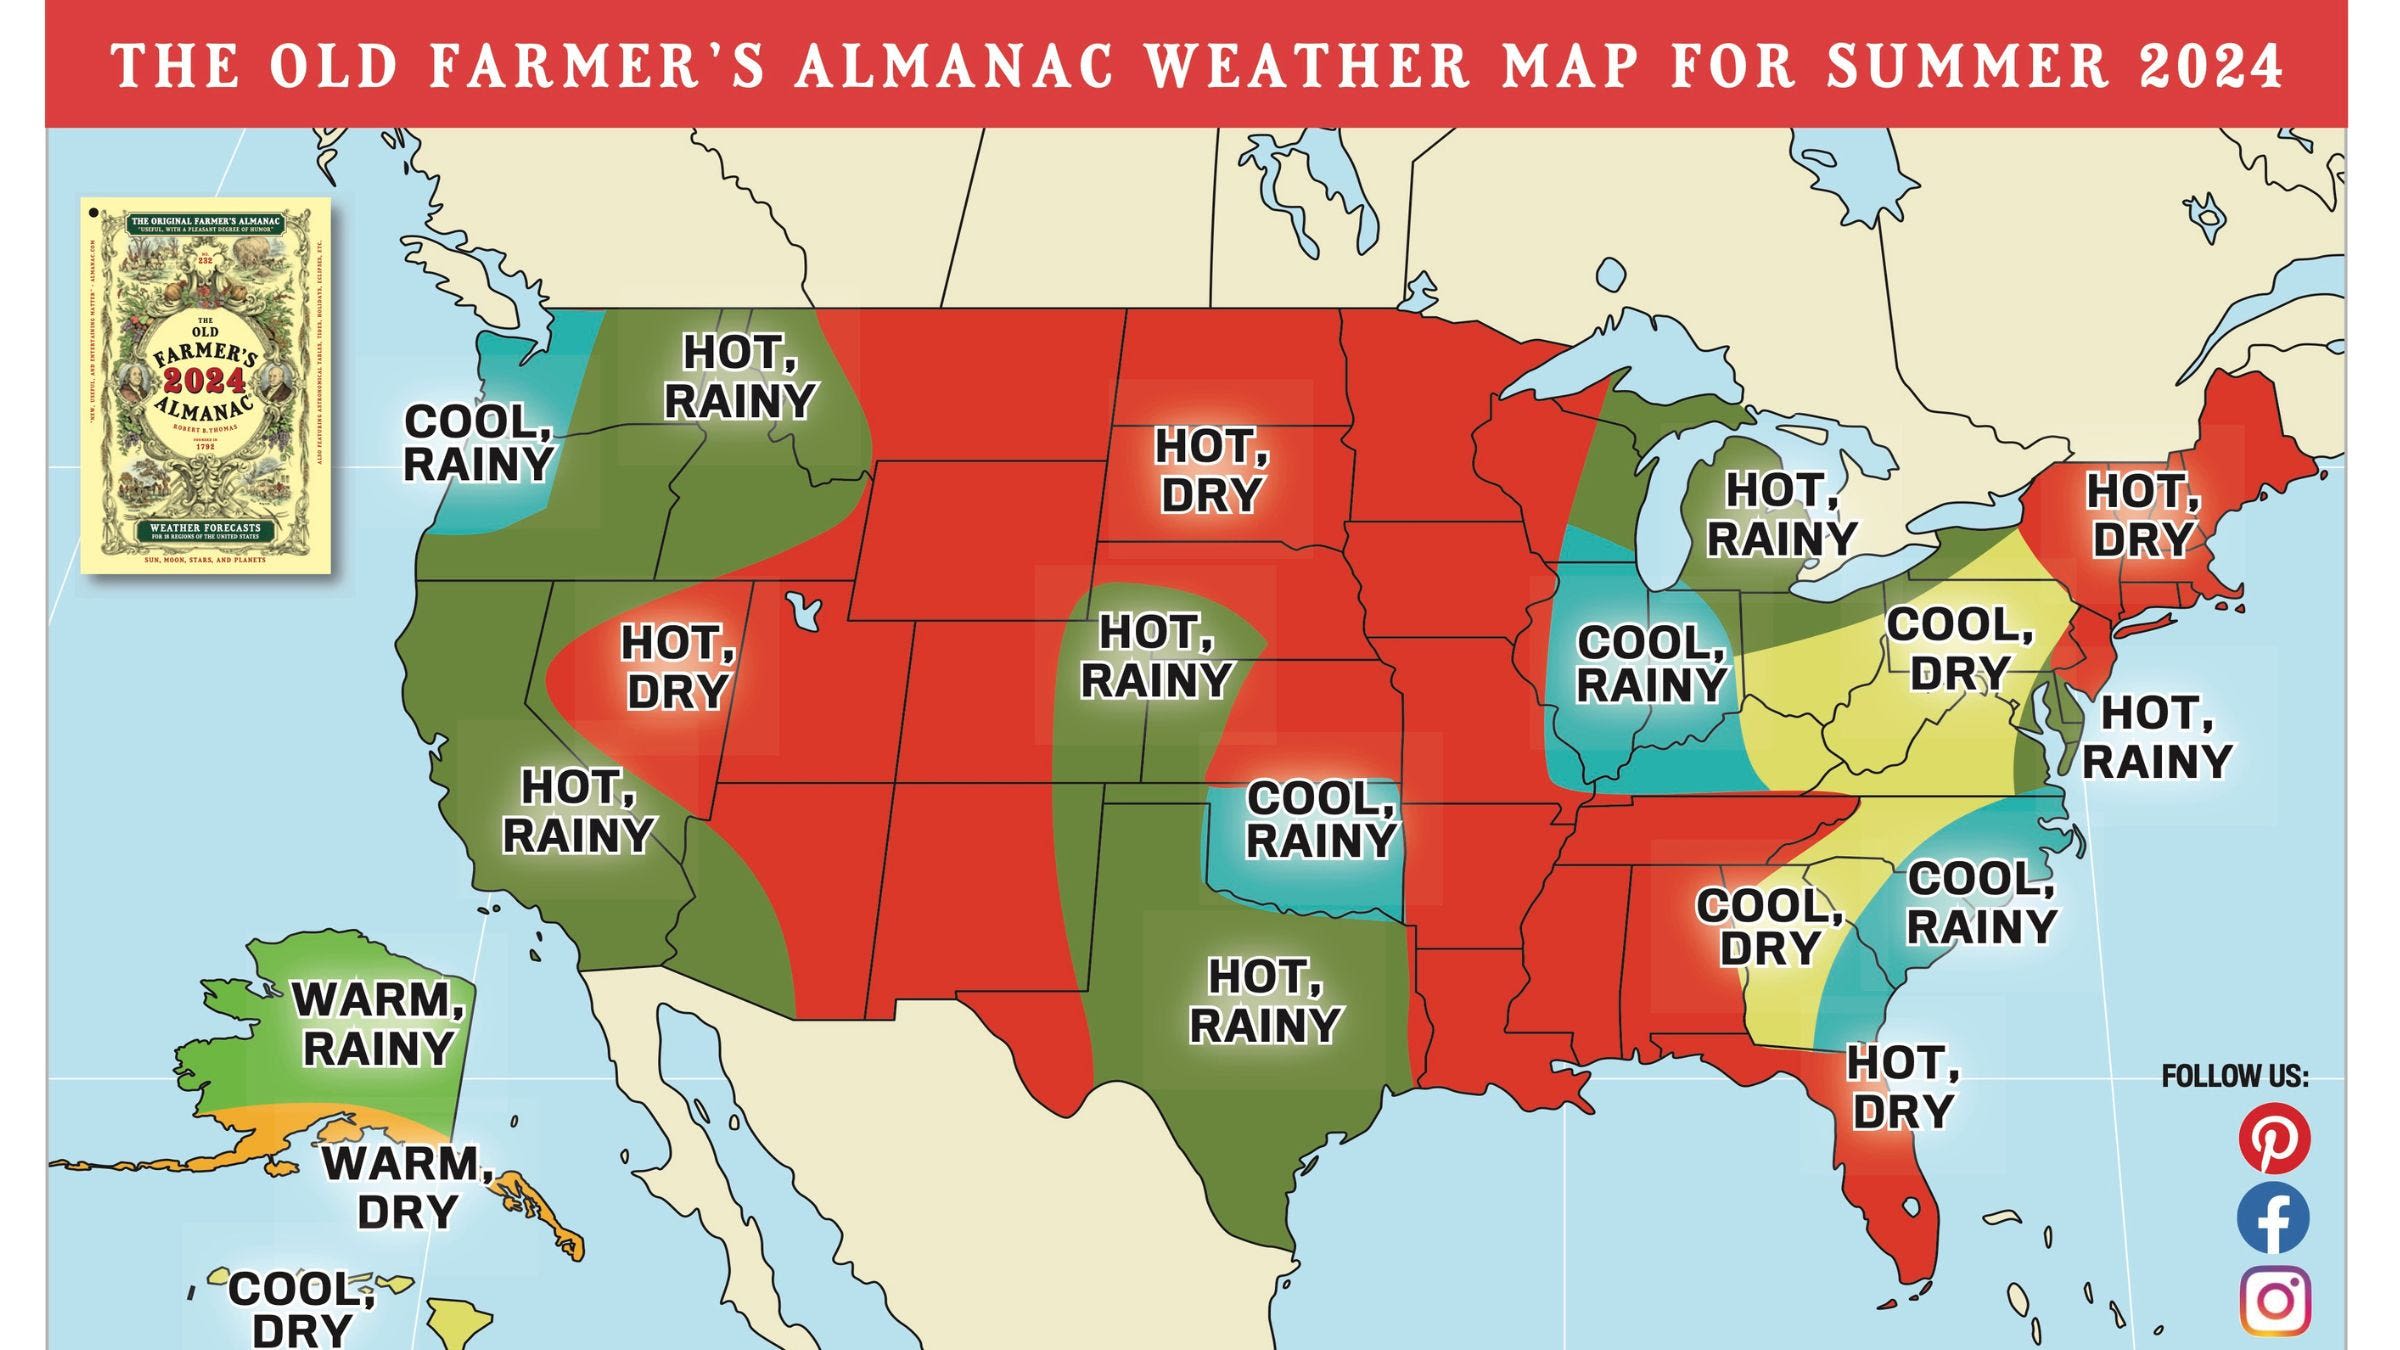 Old Farmer's Almanac predicts a cool and dry summer for Greater Cincinnati